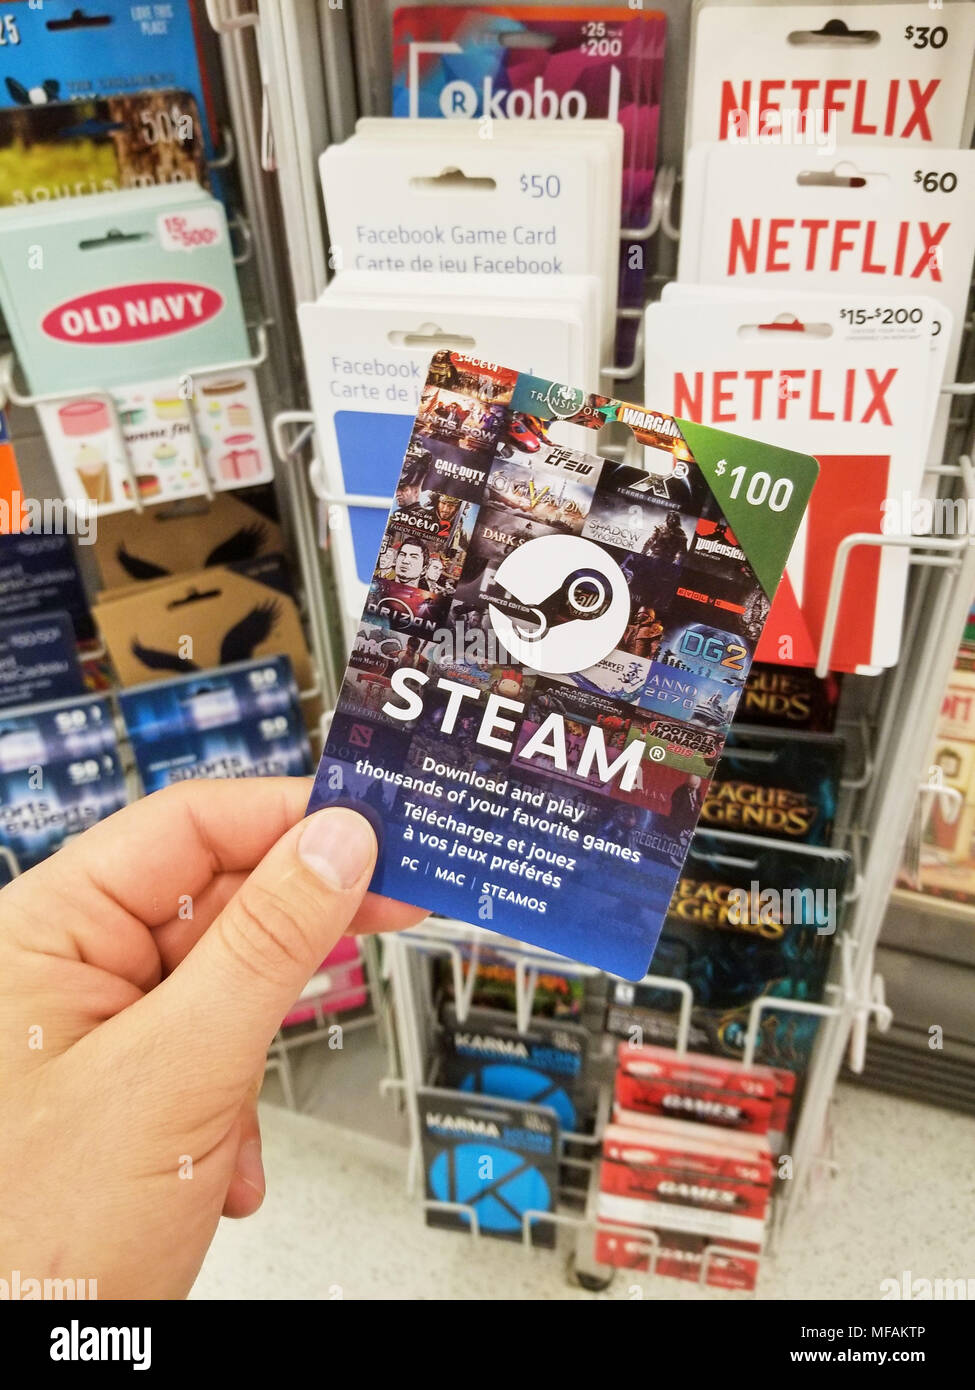 carte steam canada Montreal Canada April 7 2018 A Hand Holding A Steam Gift Card Steam Is A Digital Distribution Platform Developed By Valve Corporation Which Off Stock Photo Alamy carte steam canada